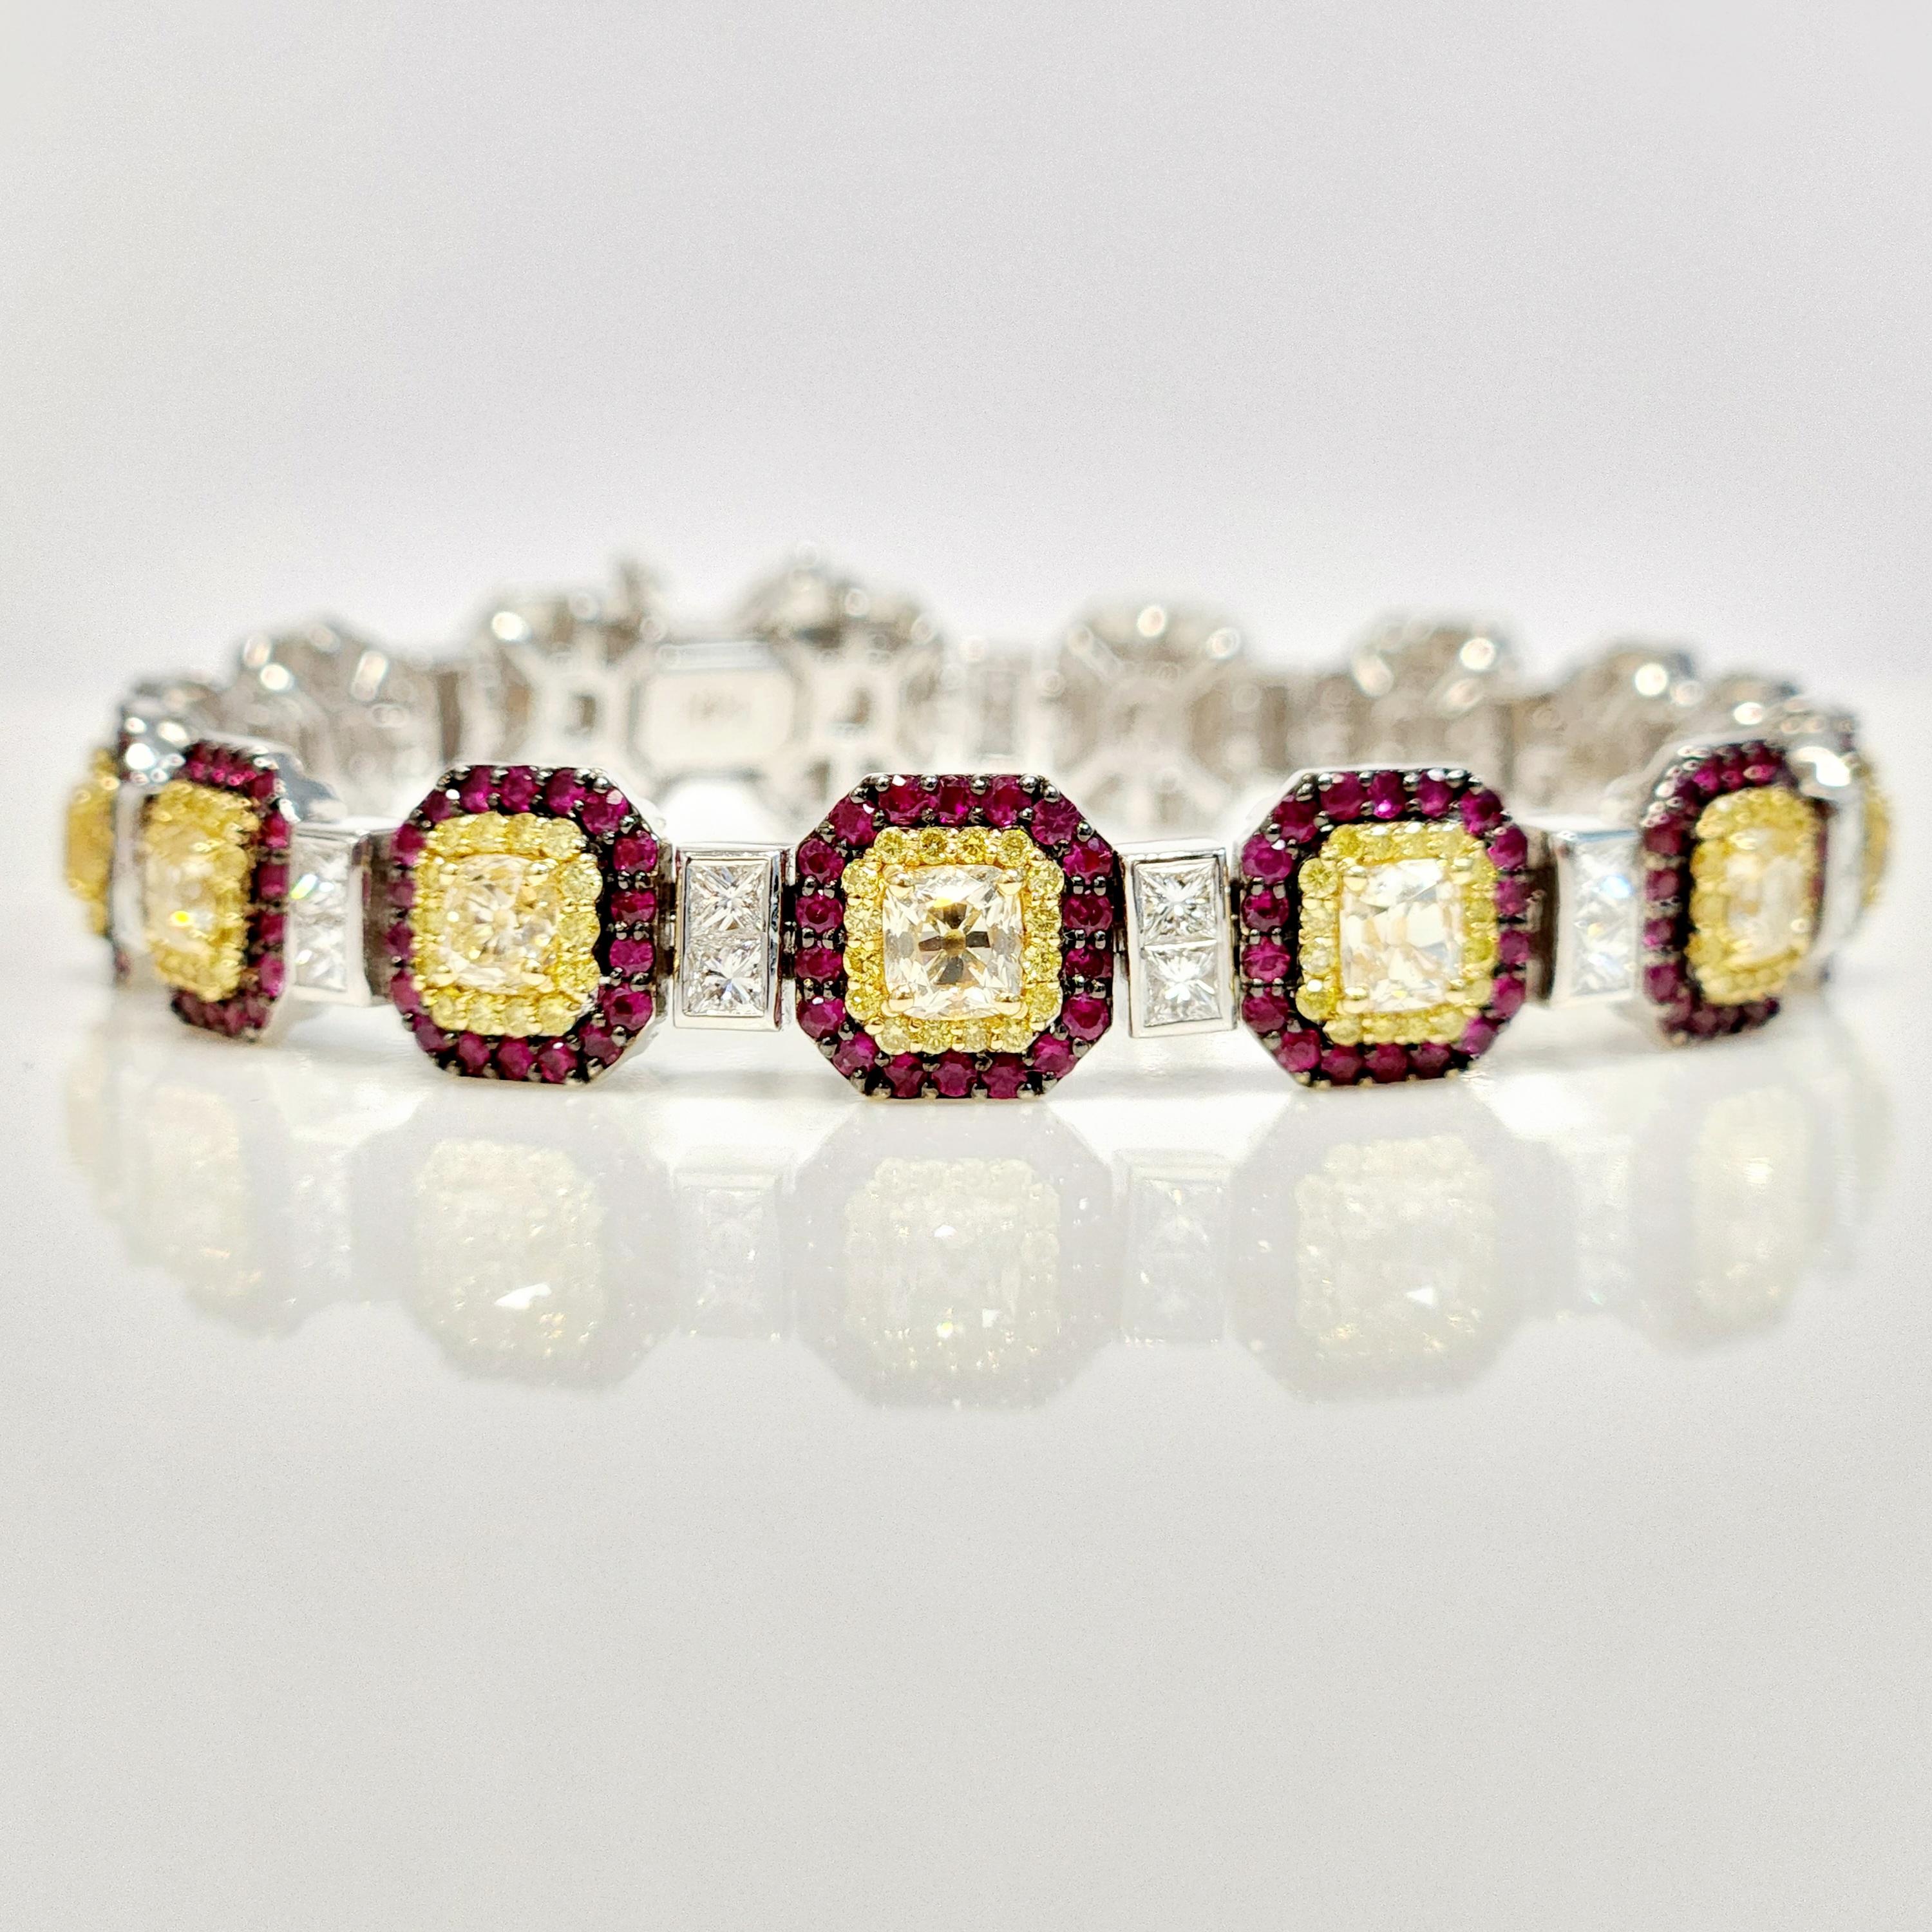 Elevate your style with the striking beauty of the Cushion Shaped Yellow Diamond and Red Ruby Line Bracelet. This exquisite piece features 4.71 carats cushion-shaped yellow diamonds as the focal point, each encircled by a halo of dazzling yellow